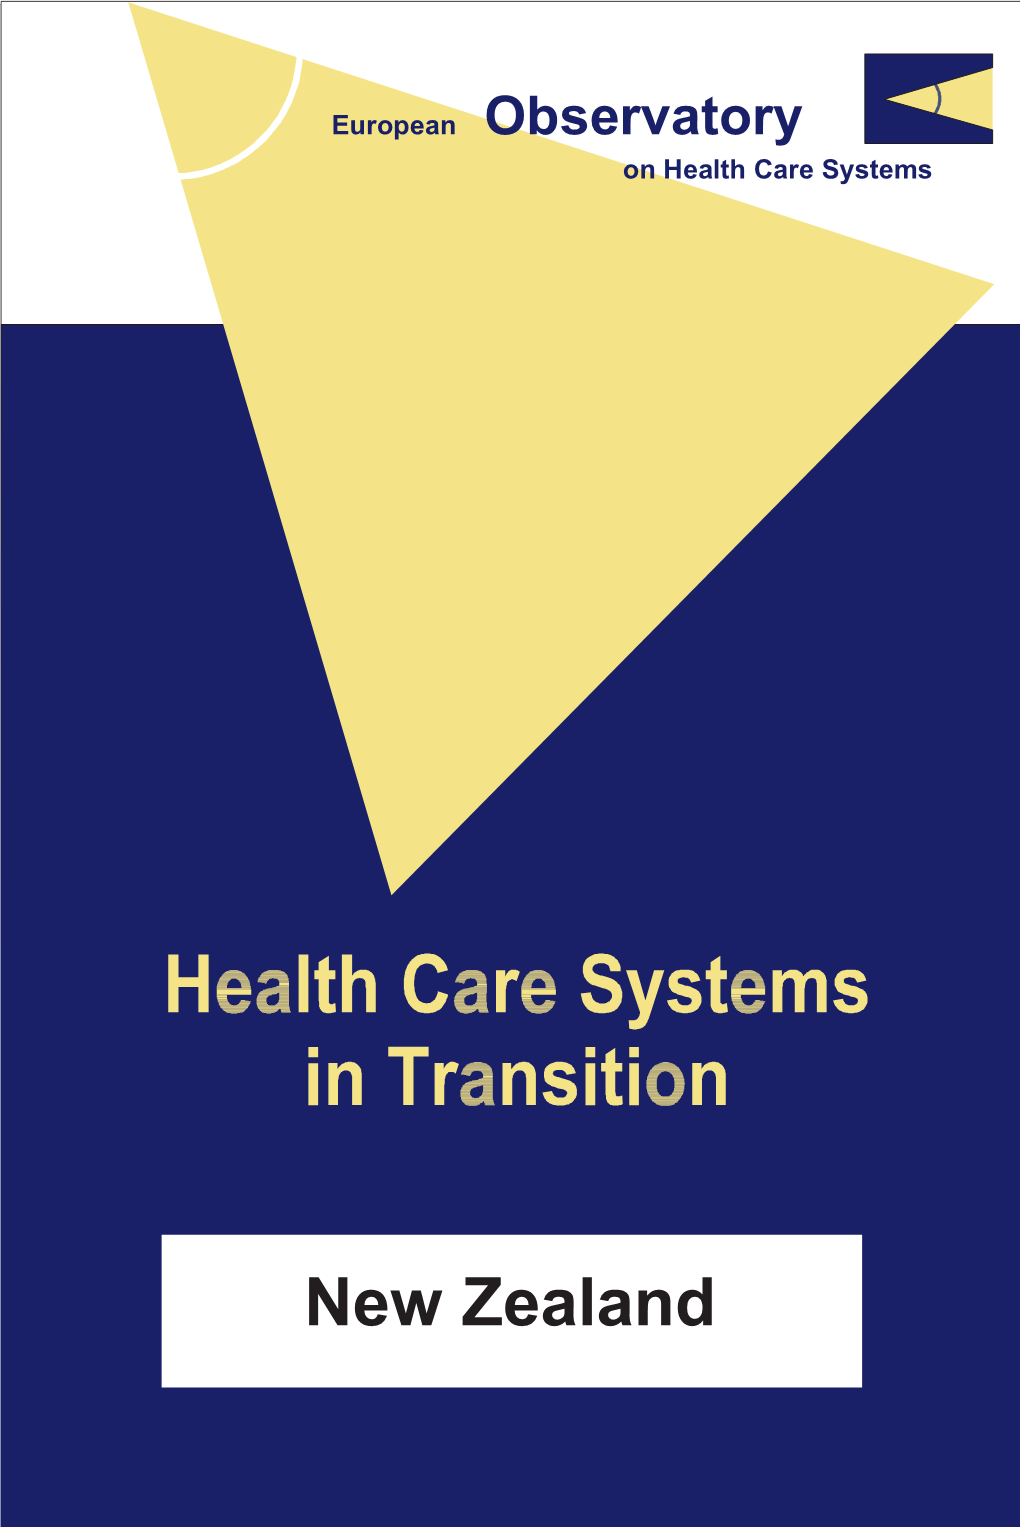 New Zealand ONAL Health Care Systems in Transition ATI BA I N RN K E F T O N R I WORLD BANK